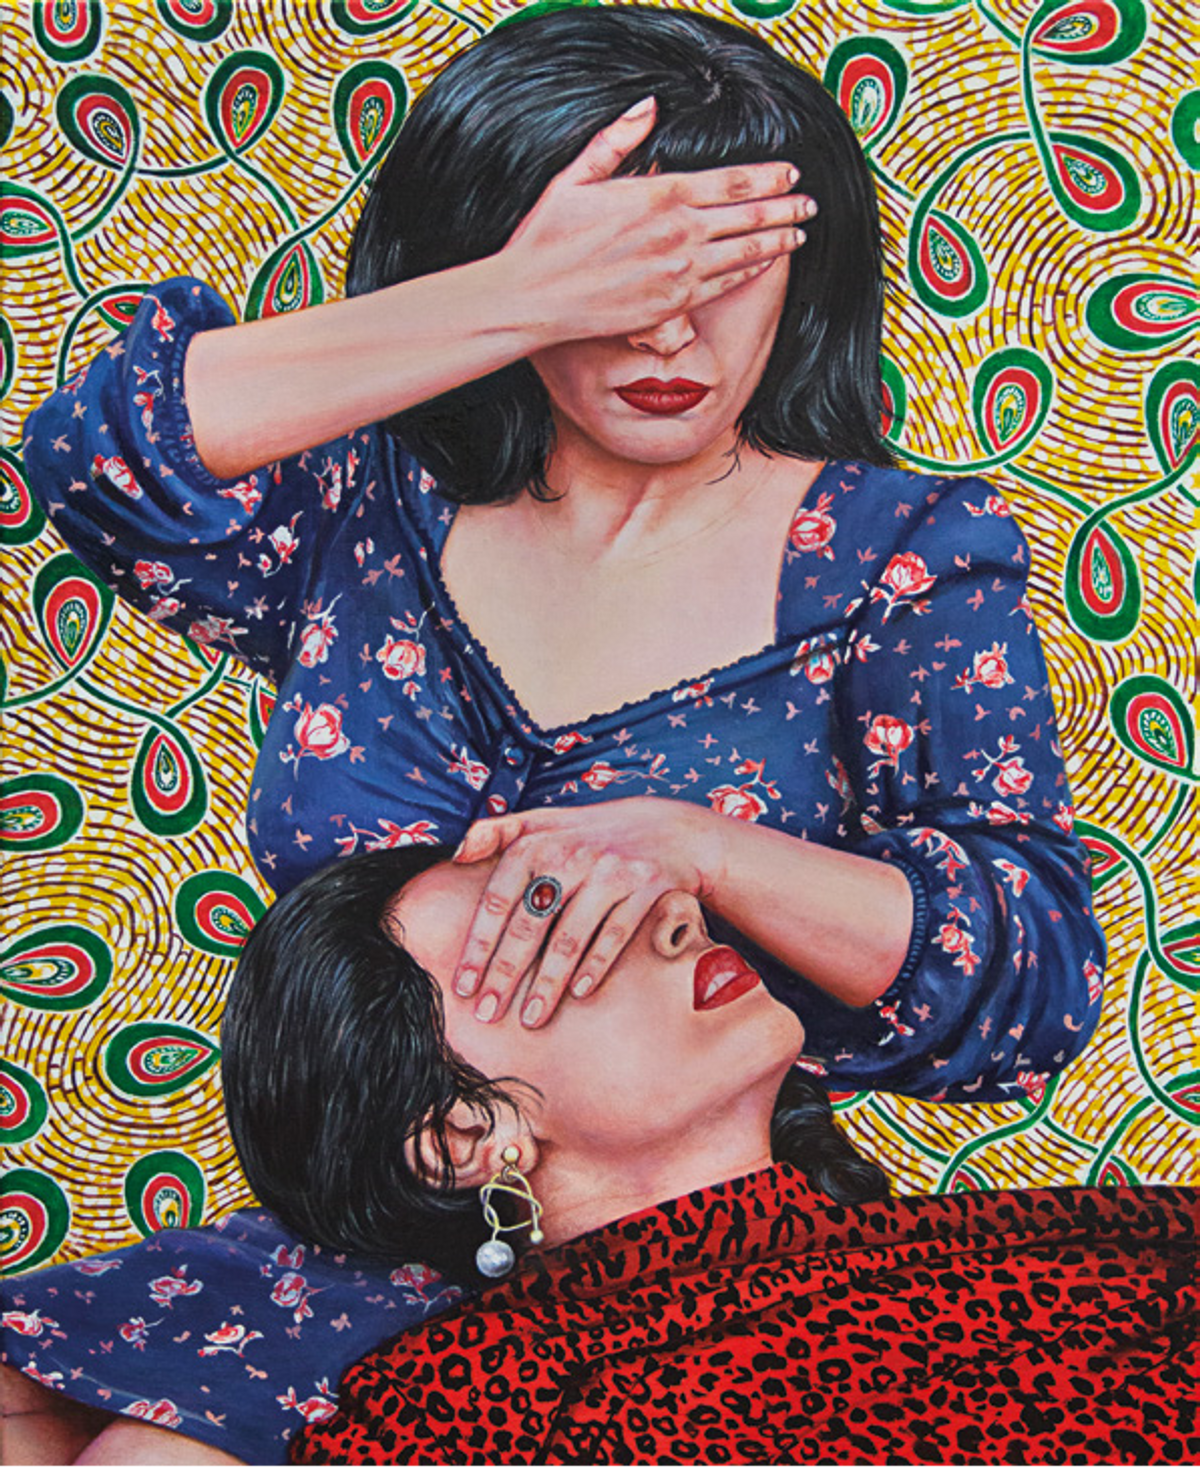 Nazanin Pouyandeh, L’Invisible Fièvre, 2020, huile sur toile. Courtesy Nazanin Pouyandeh & galerie Sator D.R.